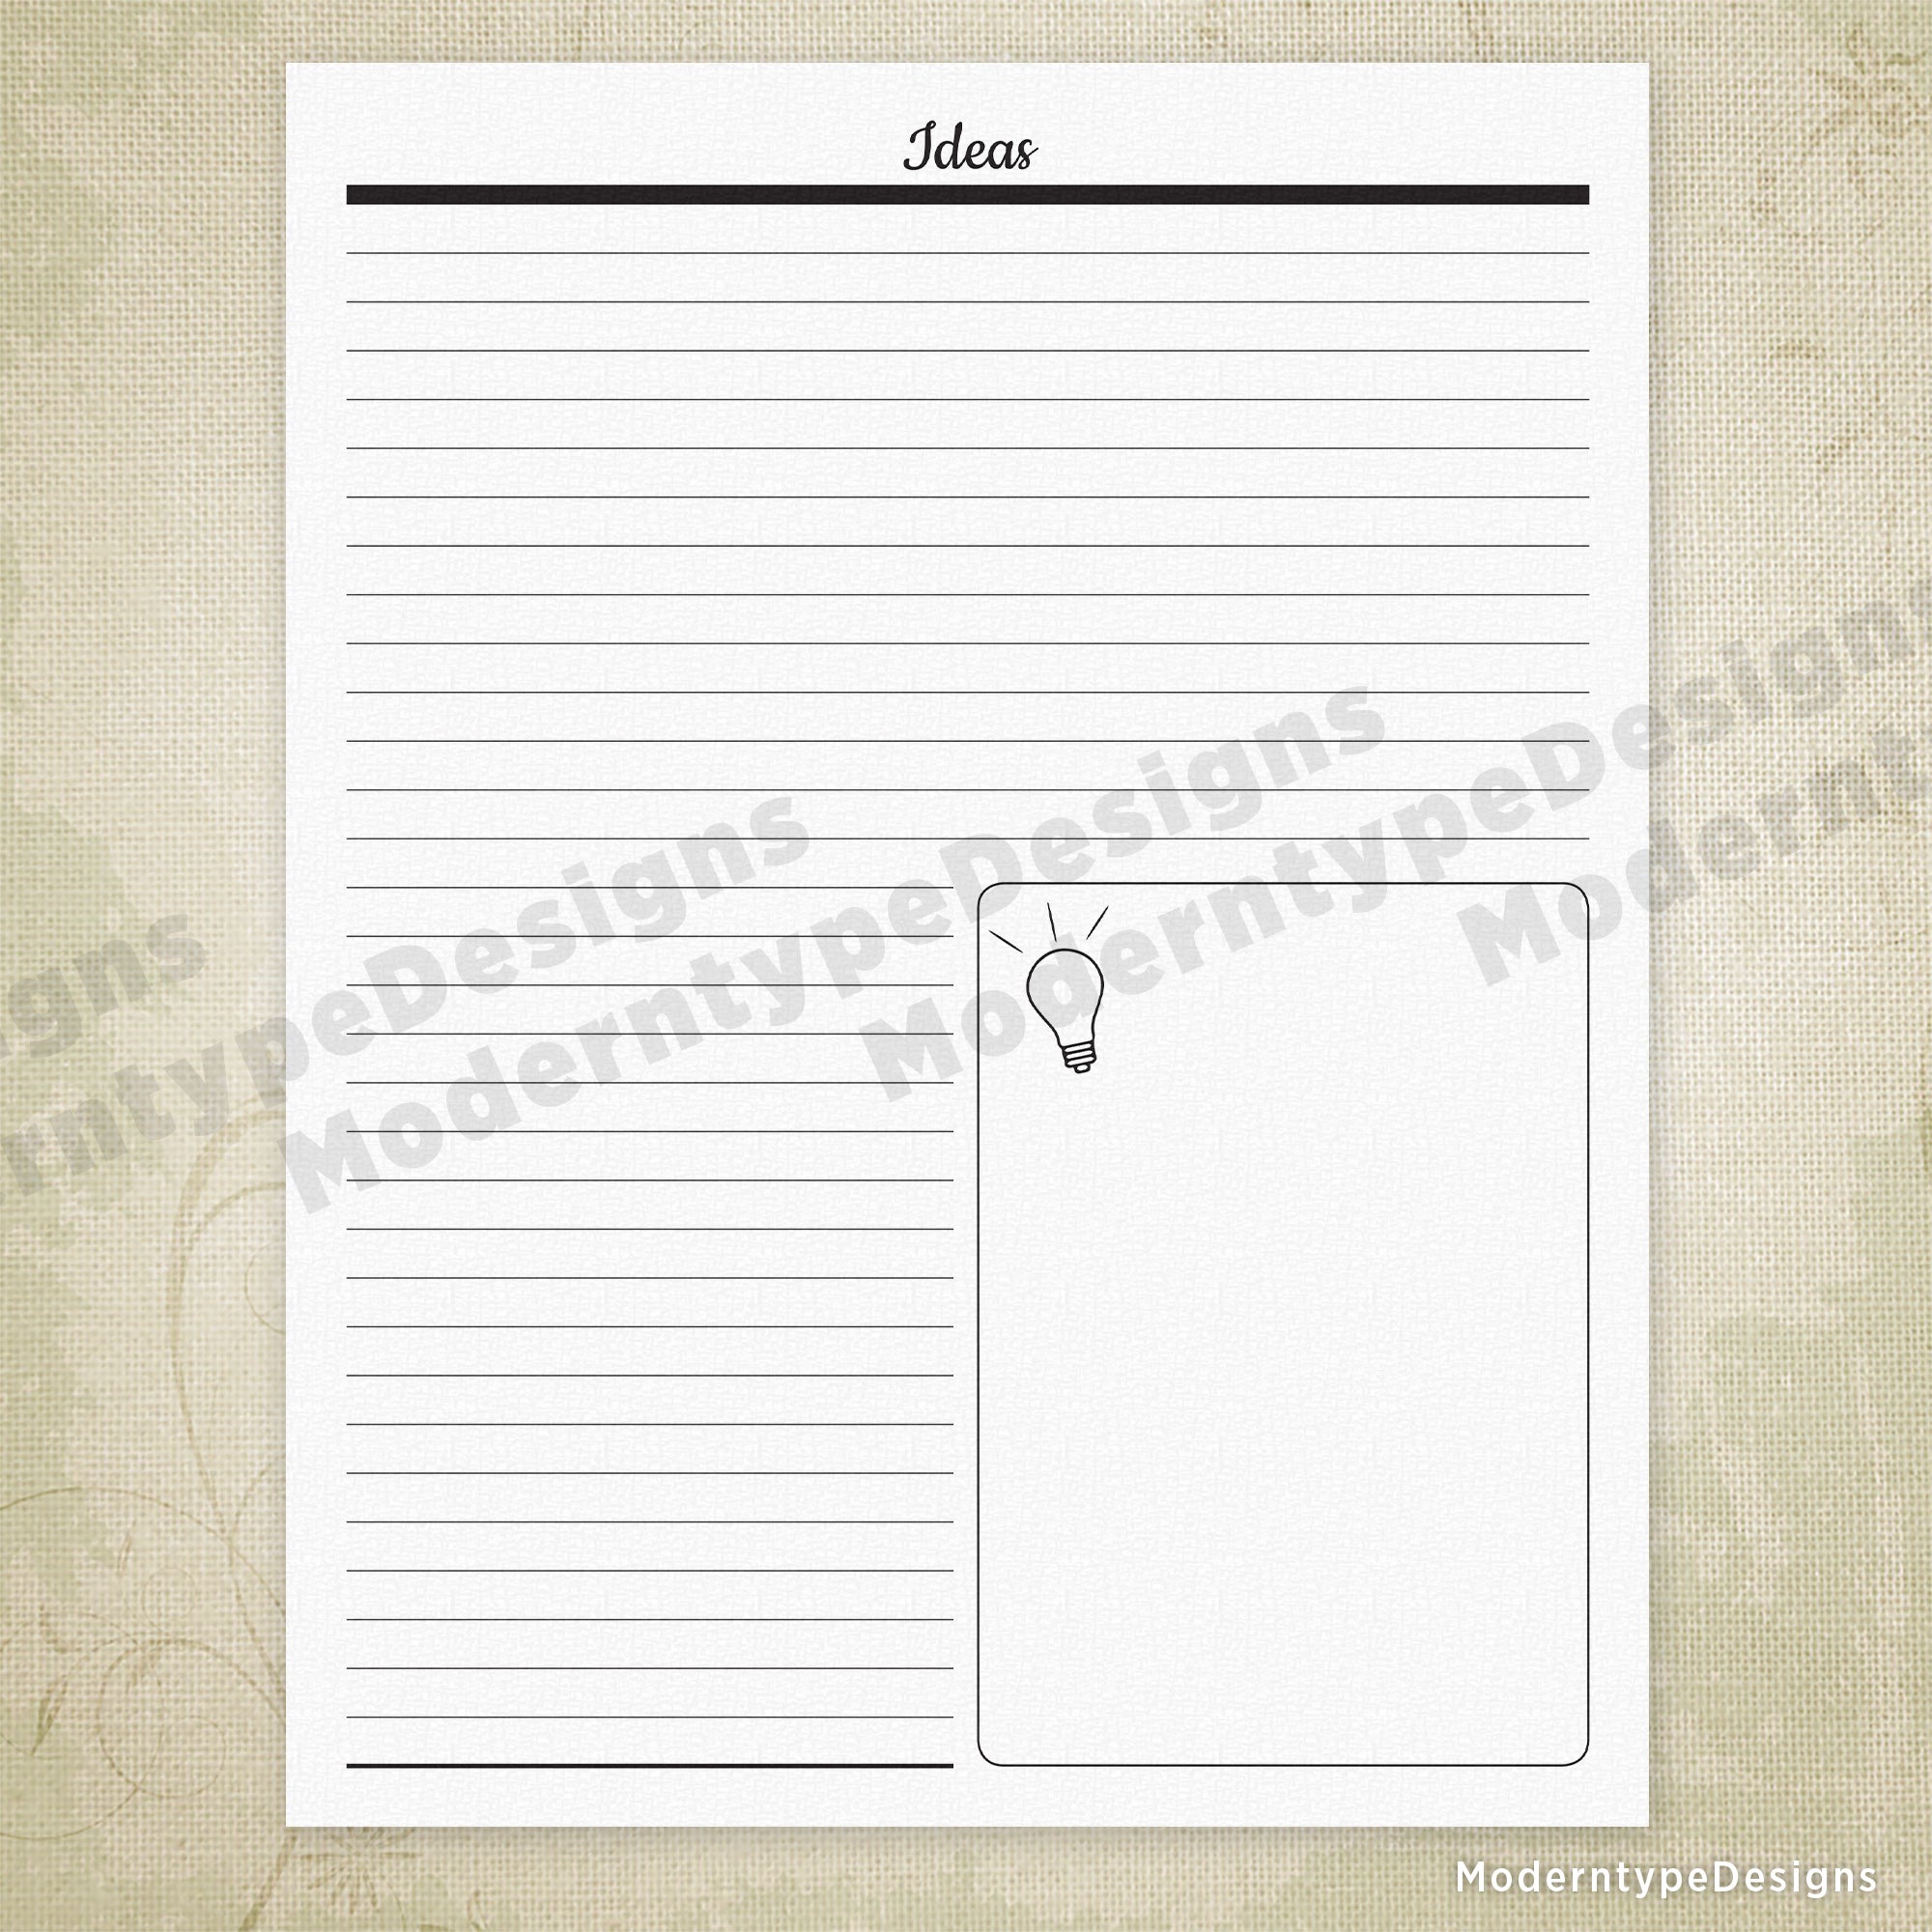 Ideas List Printable with Lines #1